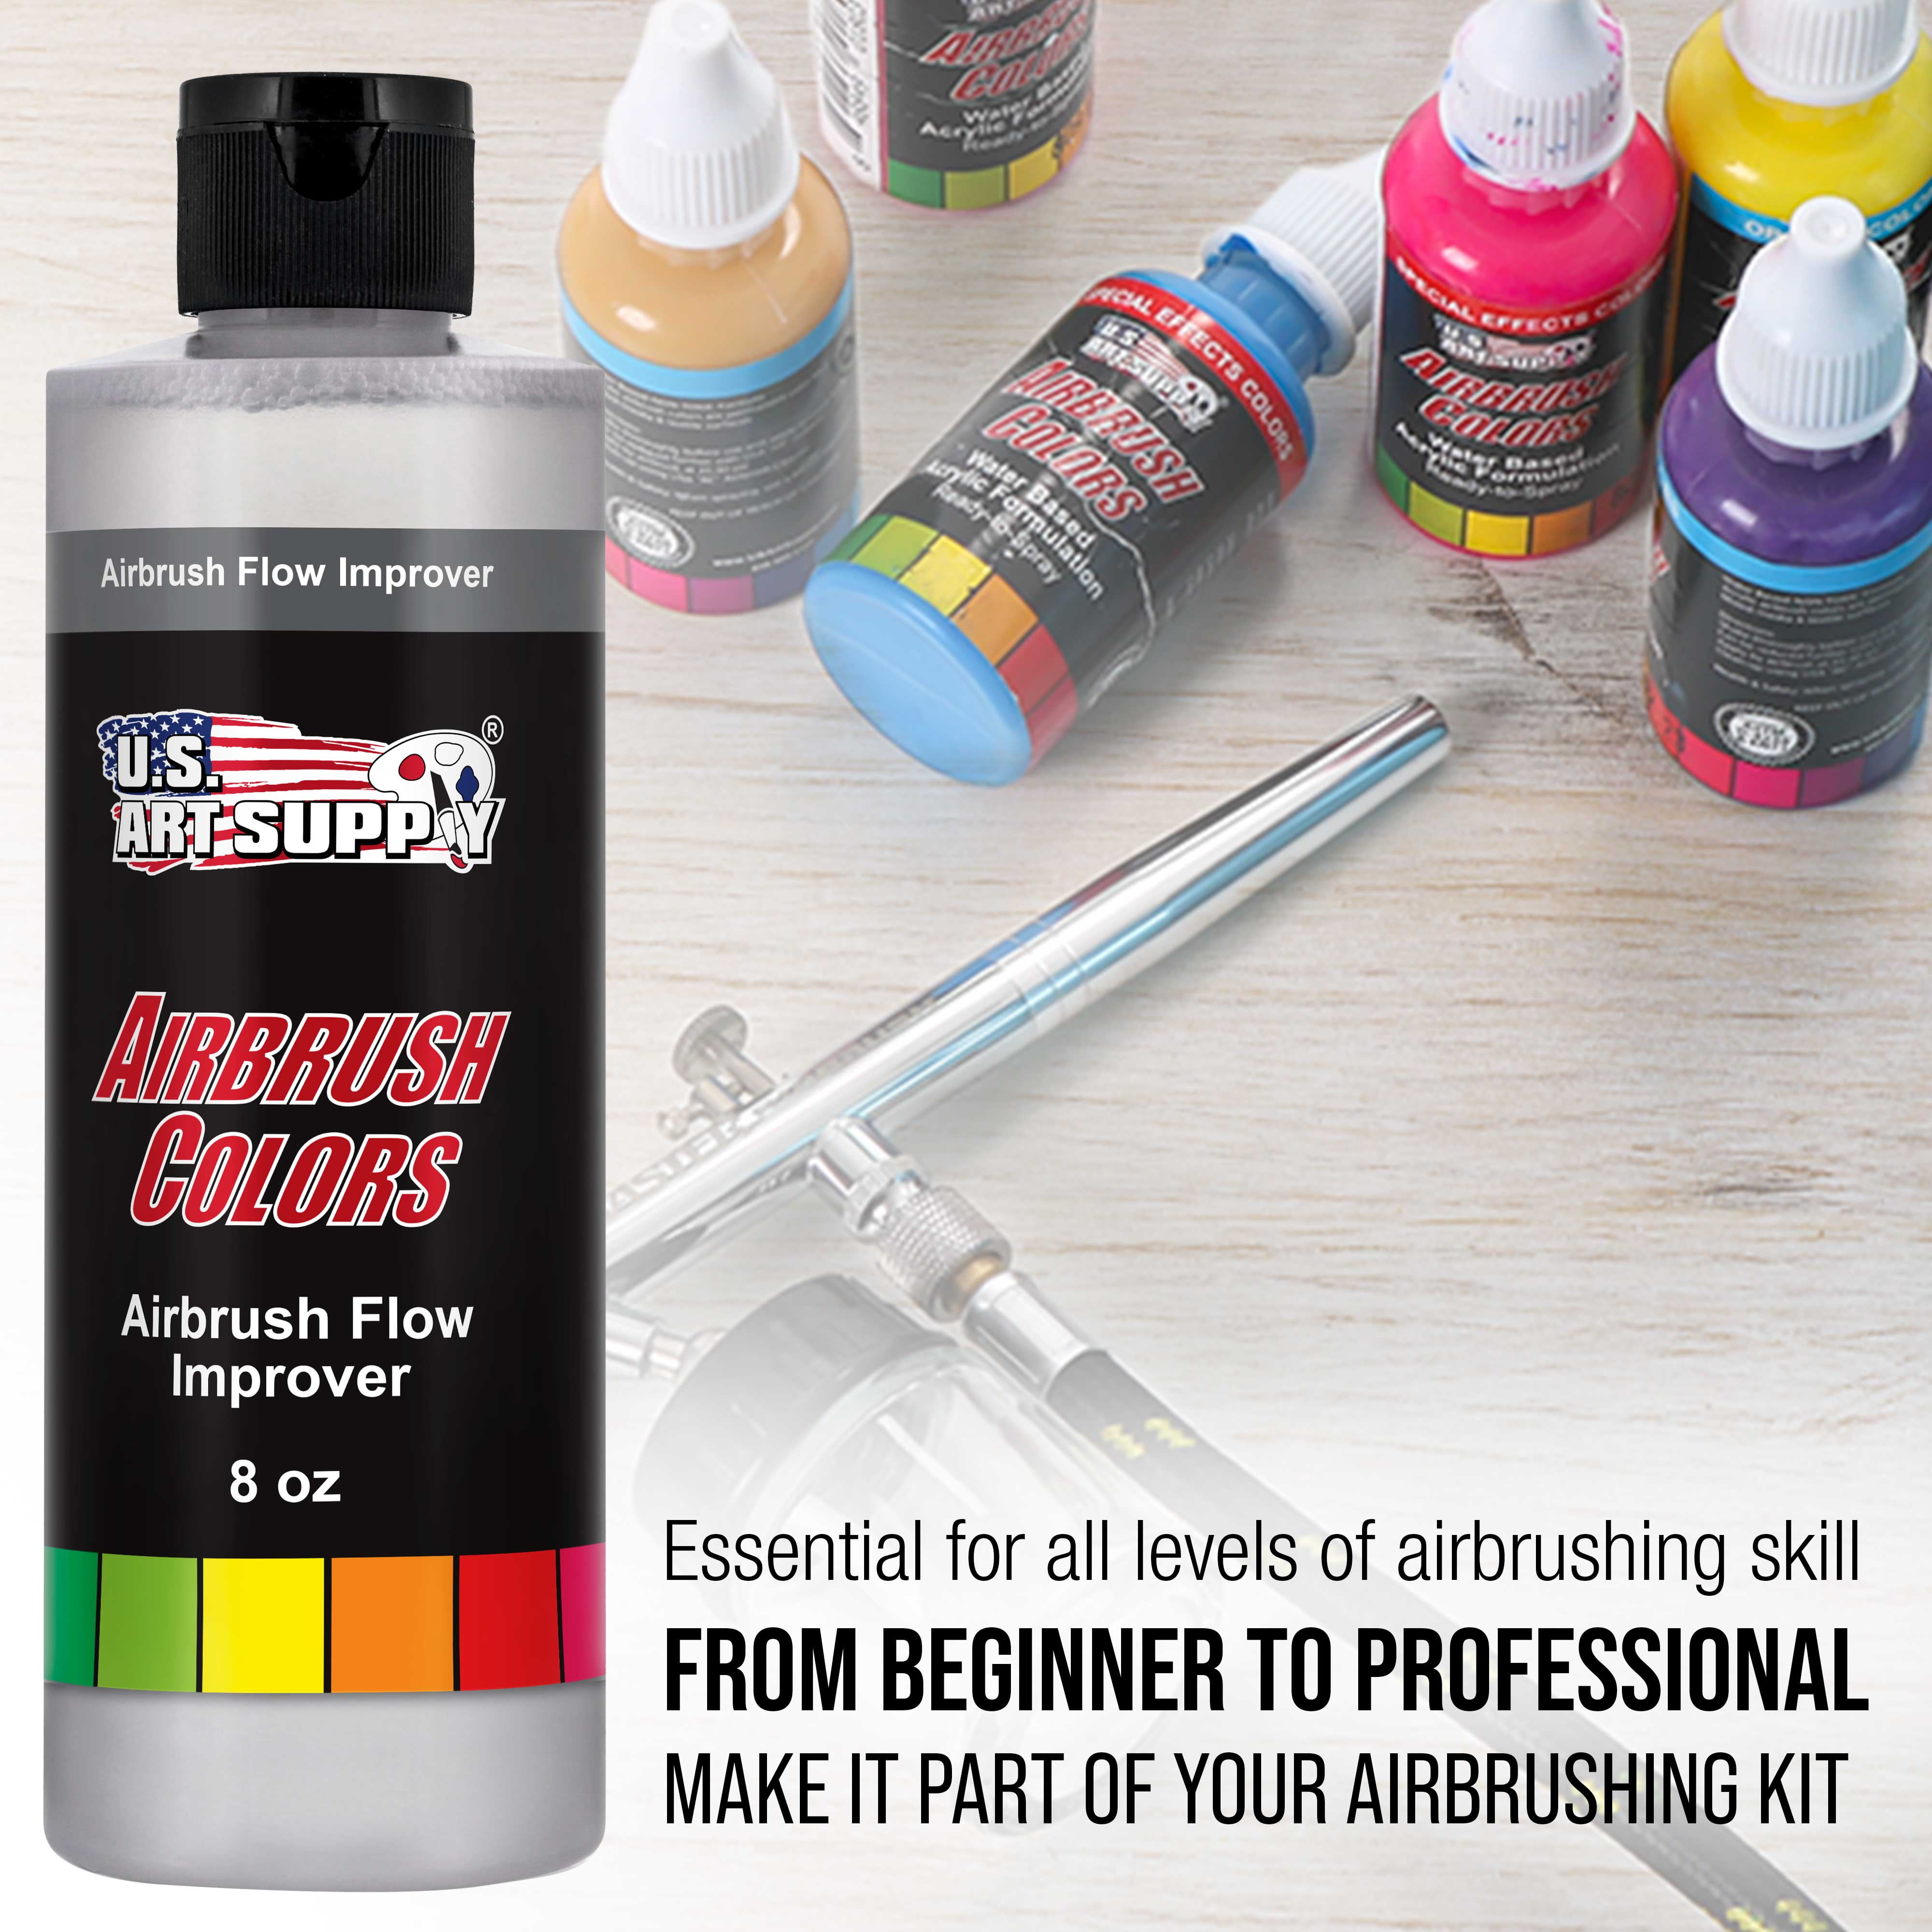 maintenance - How can I unstick my airbrush needle? - Arts & Crafts Stack  Exchange